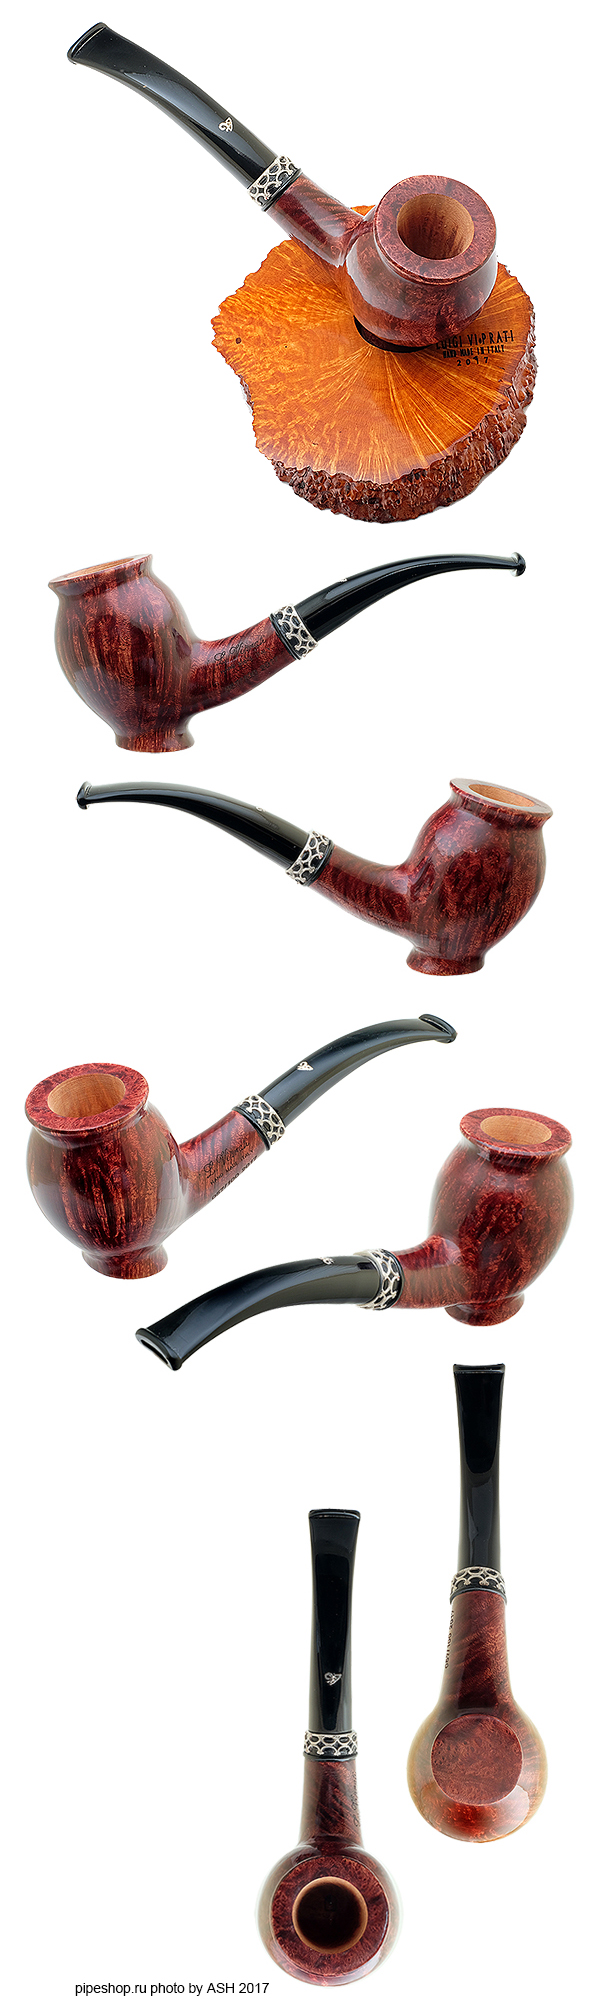   L. VIPRATI SMOOTH PIPE OF THE YEAR 2017 #057/100,  9 